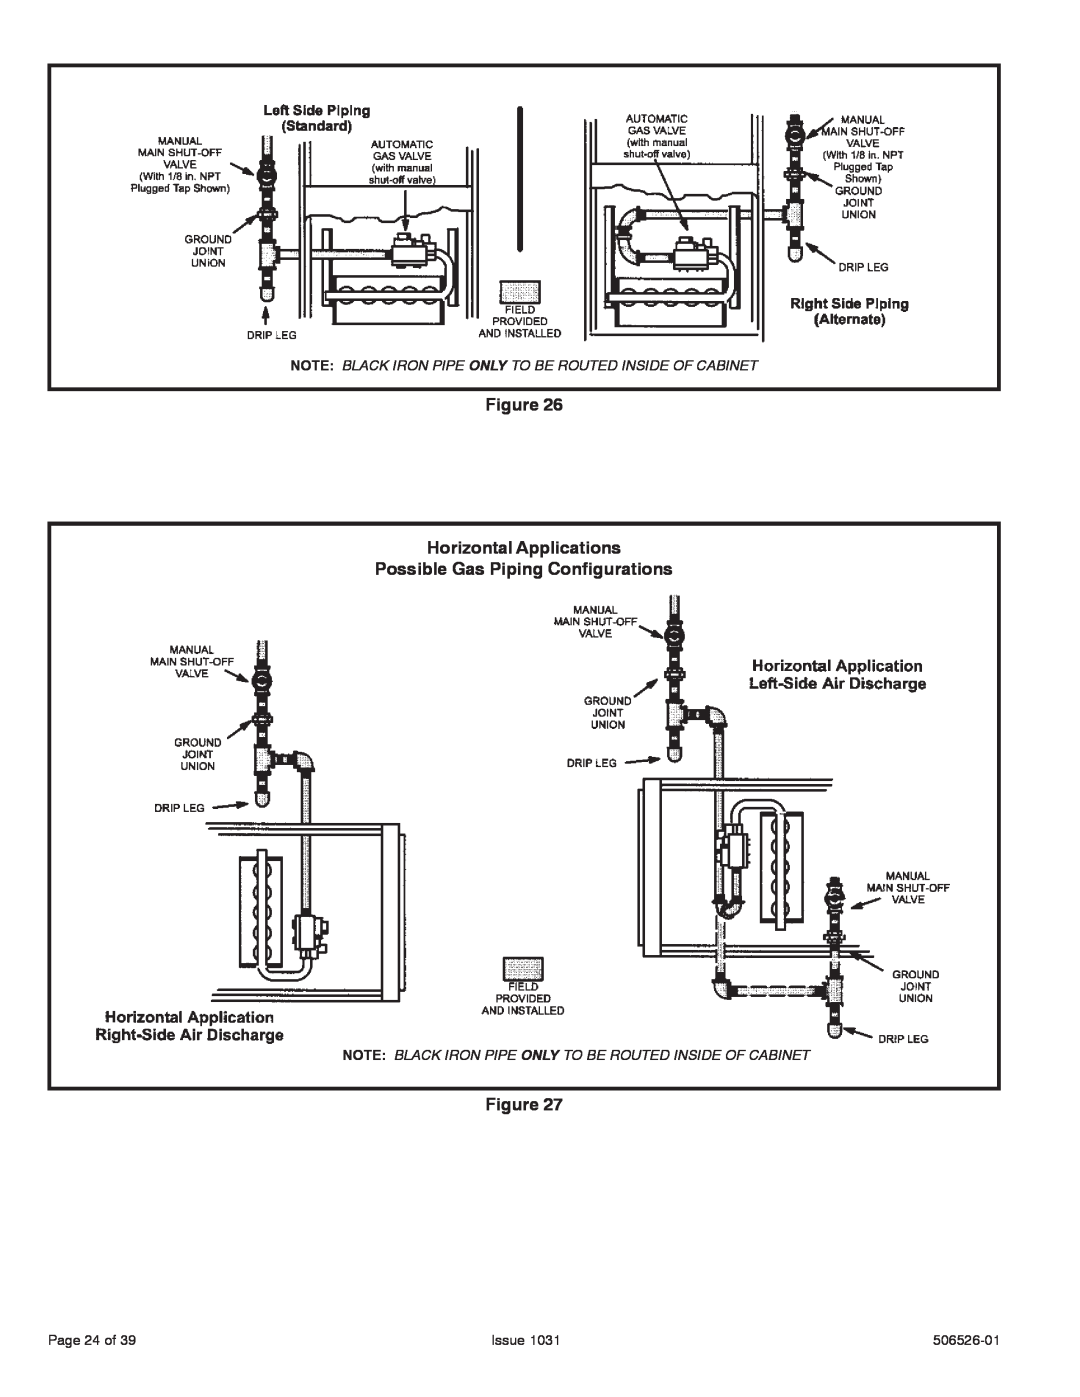 Allied Air Enterprises A80UH, 80G1UH Figure Horizontal Applications, Possible Gas Piping Configurations, Page 24 of, Issue 